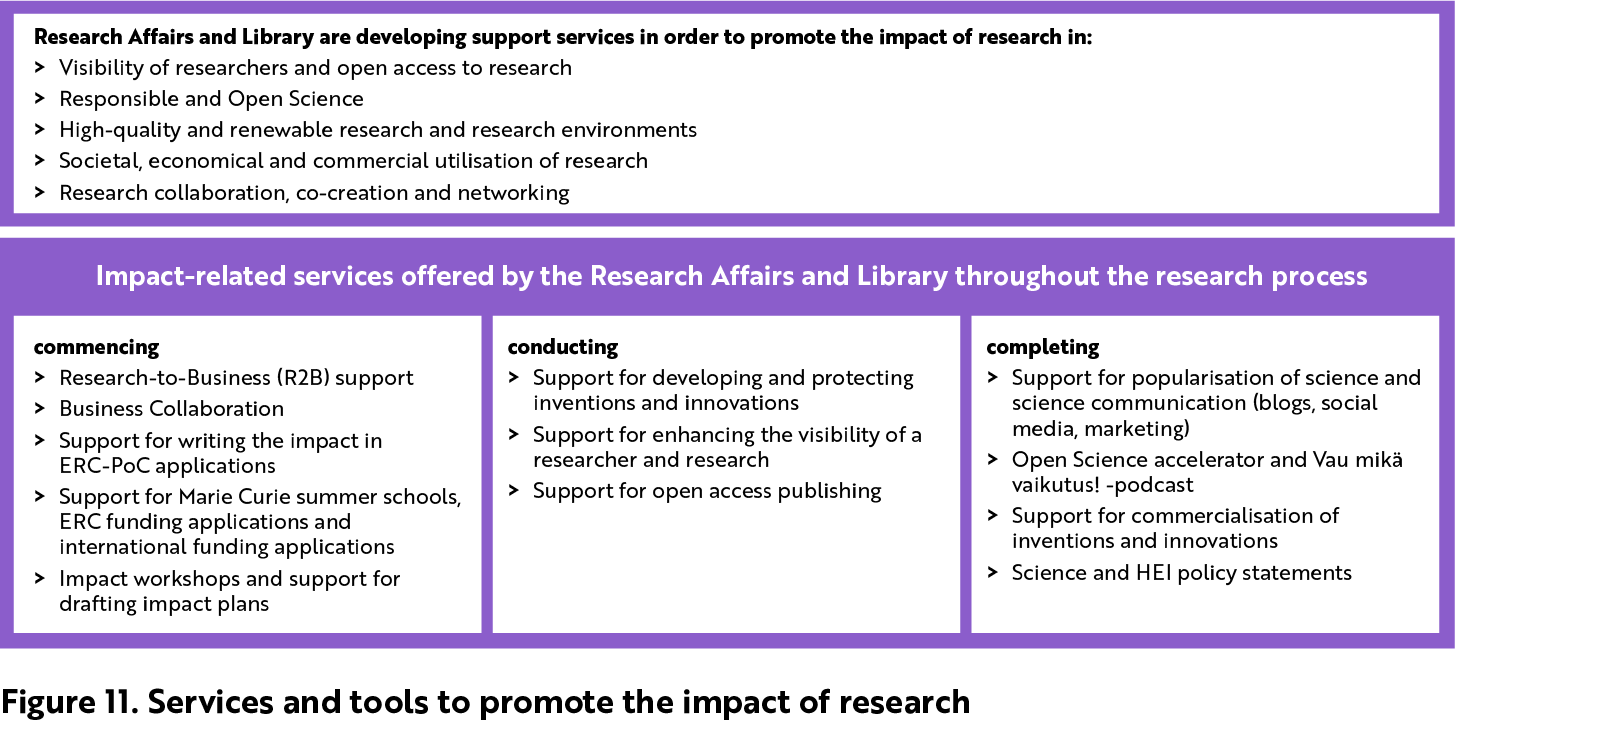 Research Affairs and Library are developing support services in order to promote the impact of research in visibility of researchers and open access to research, Responsible and Open Science, high-quality and renewable research and research environments, societal, economical and commercial utilisation of research as well as research coll¬aboration, co-creation and networking. Impact-re¬lated services offered by the Research Affairs and Library throughout the research process. Commencing. Research-to-Business R2B support, Business Coll¬aboration, Support for writing the impact in ERC-PoC applications, Support for Marie Curie summer schools, ERC funding applications and international funding applications, Impact workshops and support for drafting impact p¬lans. Conducting. Support for developing and protecting inventions and innovations, Support for enhancing the visibility of a researcher and research, Support for open access publishing. Completing. Support for popuralisation of science and science communication, e.g. blogs, social media and marketing, Open Science accelerator and Vau mikä vaikutus! -podcast, Support for commercialisation of inventions and innovations and Science and HEI policy statements.